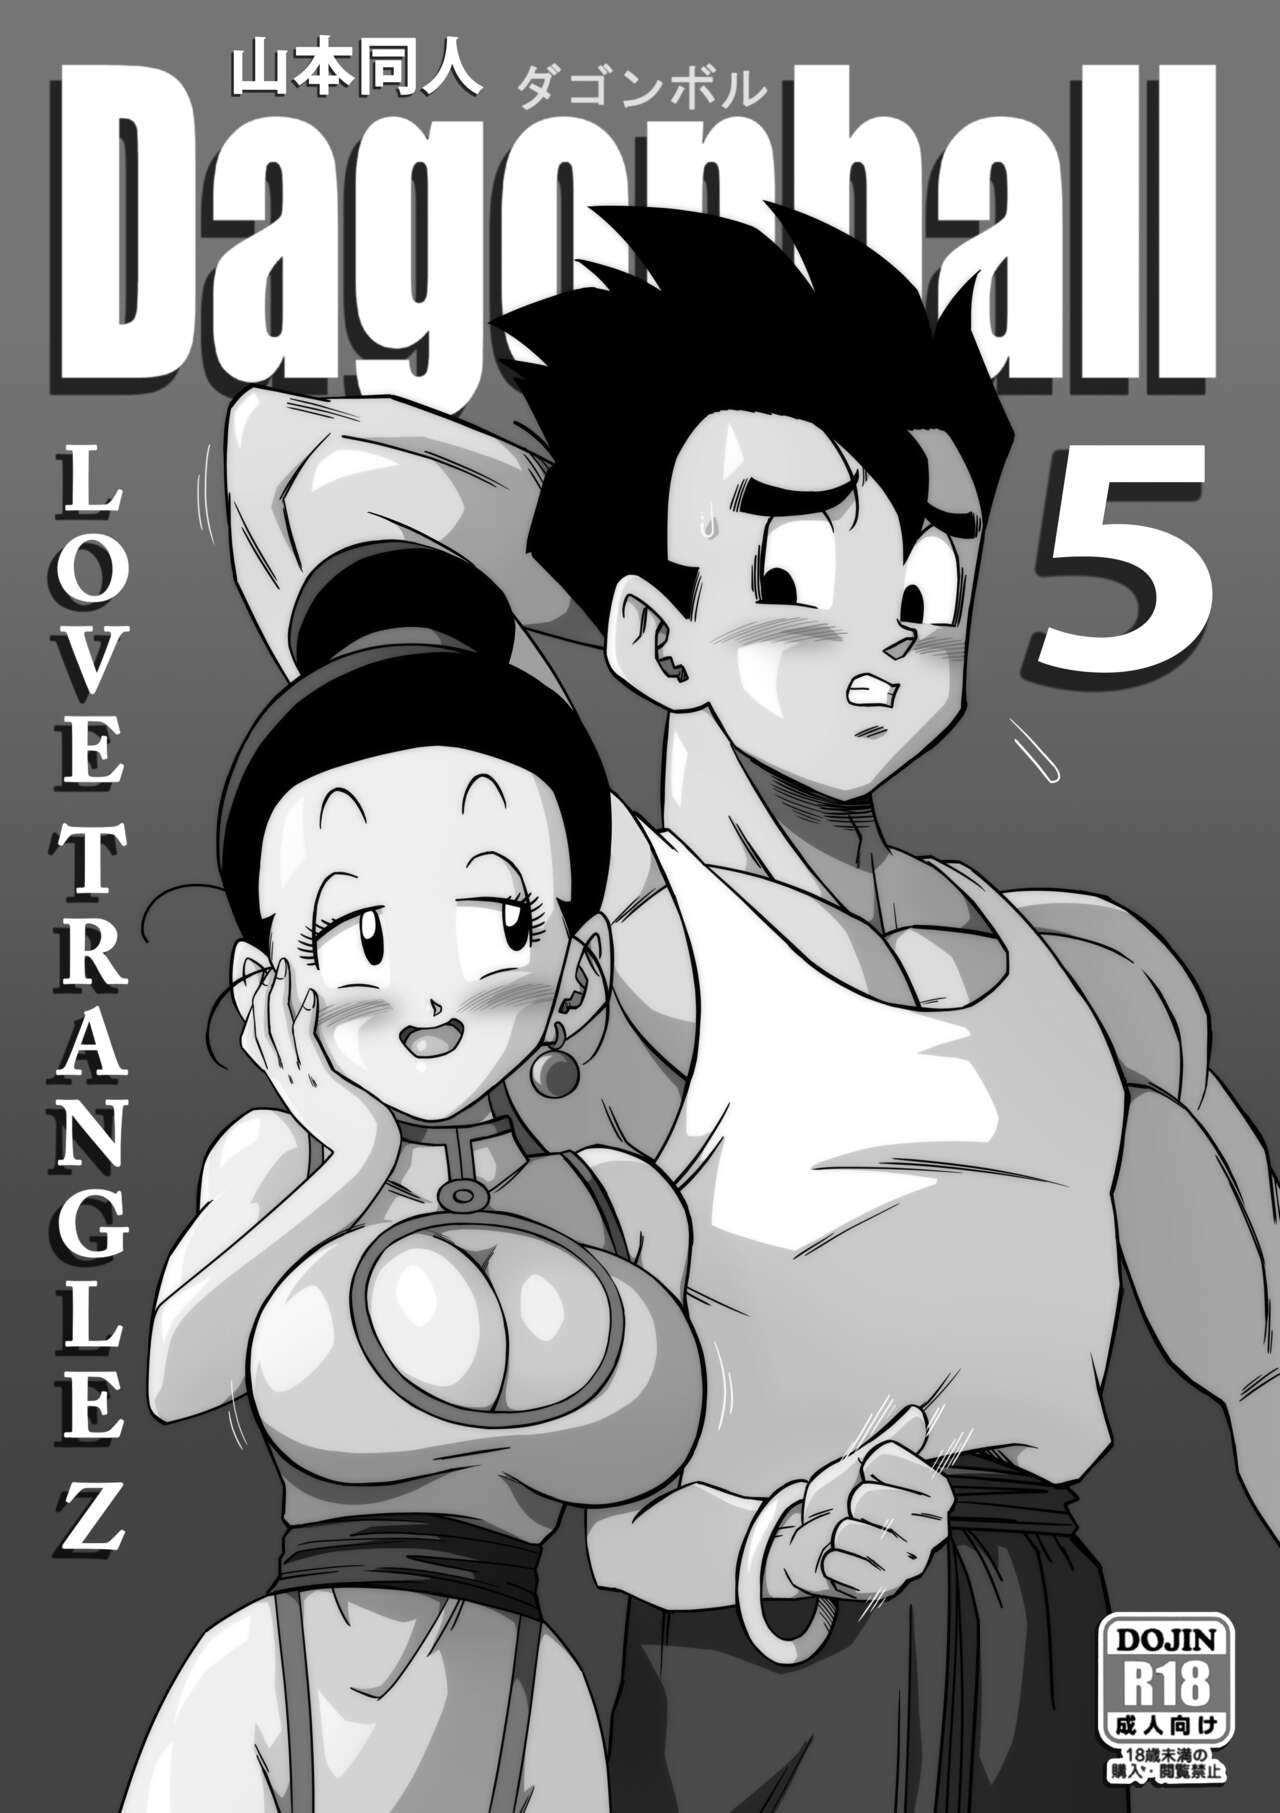 Girl LOVE TRIANGLE Z PART 5 - Dragon ball z Oiled - Picture 2